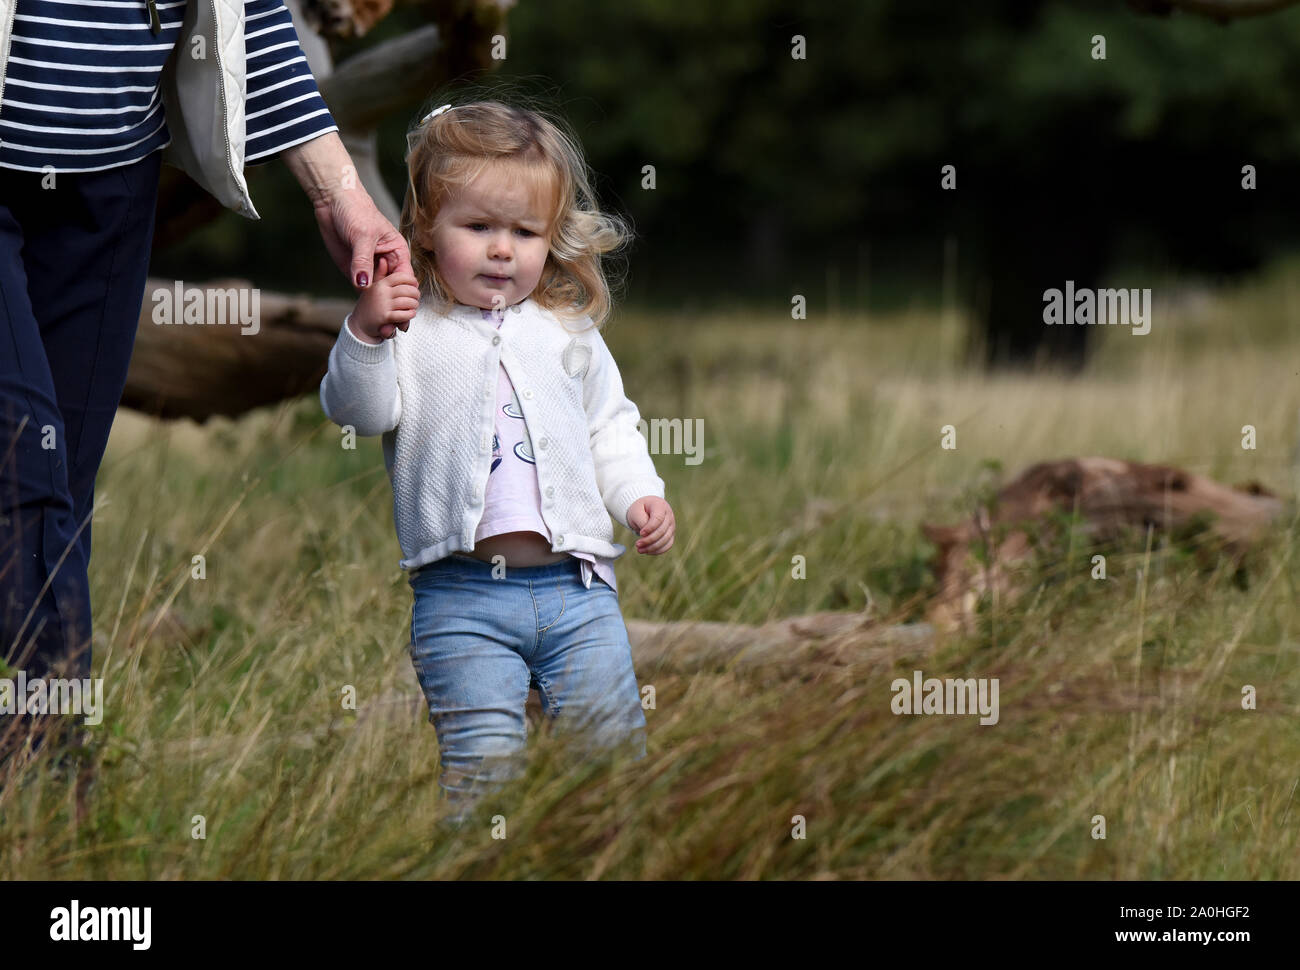 Child toddler girl holding hands with adult while walking Stock Photo